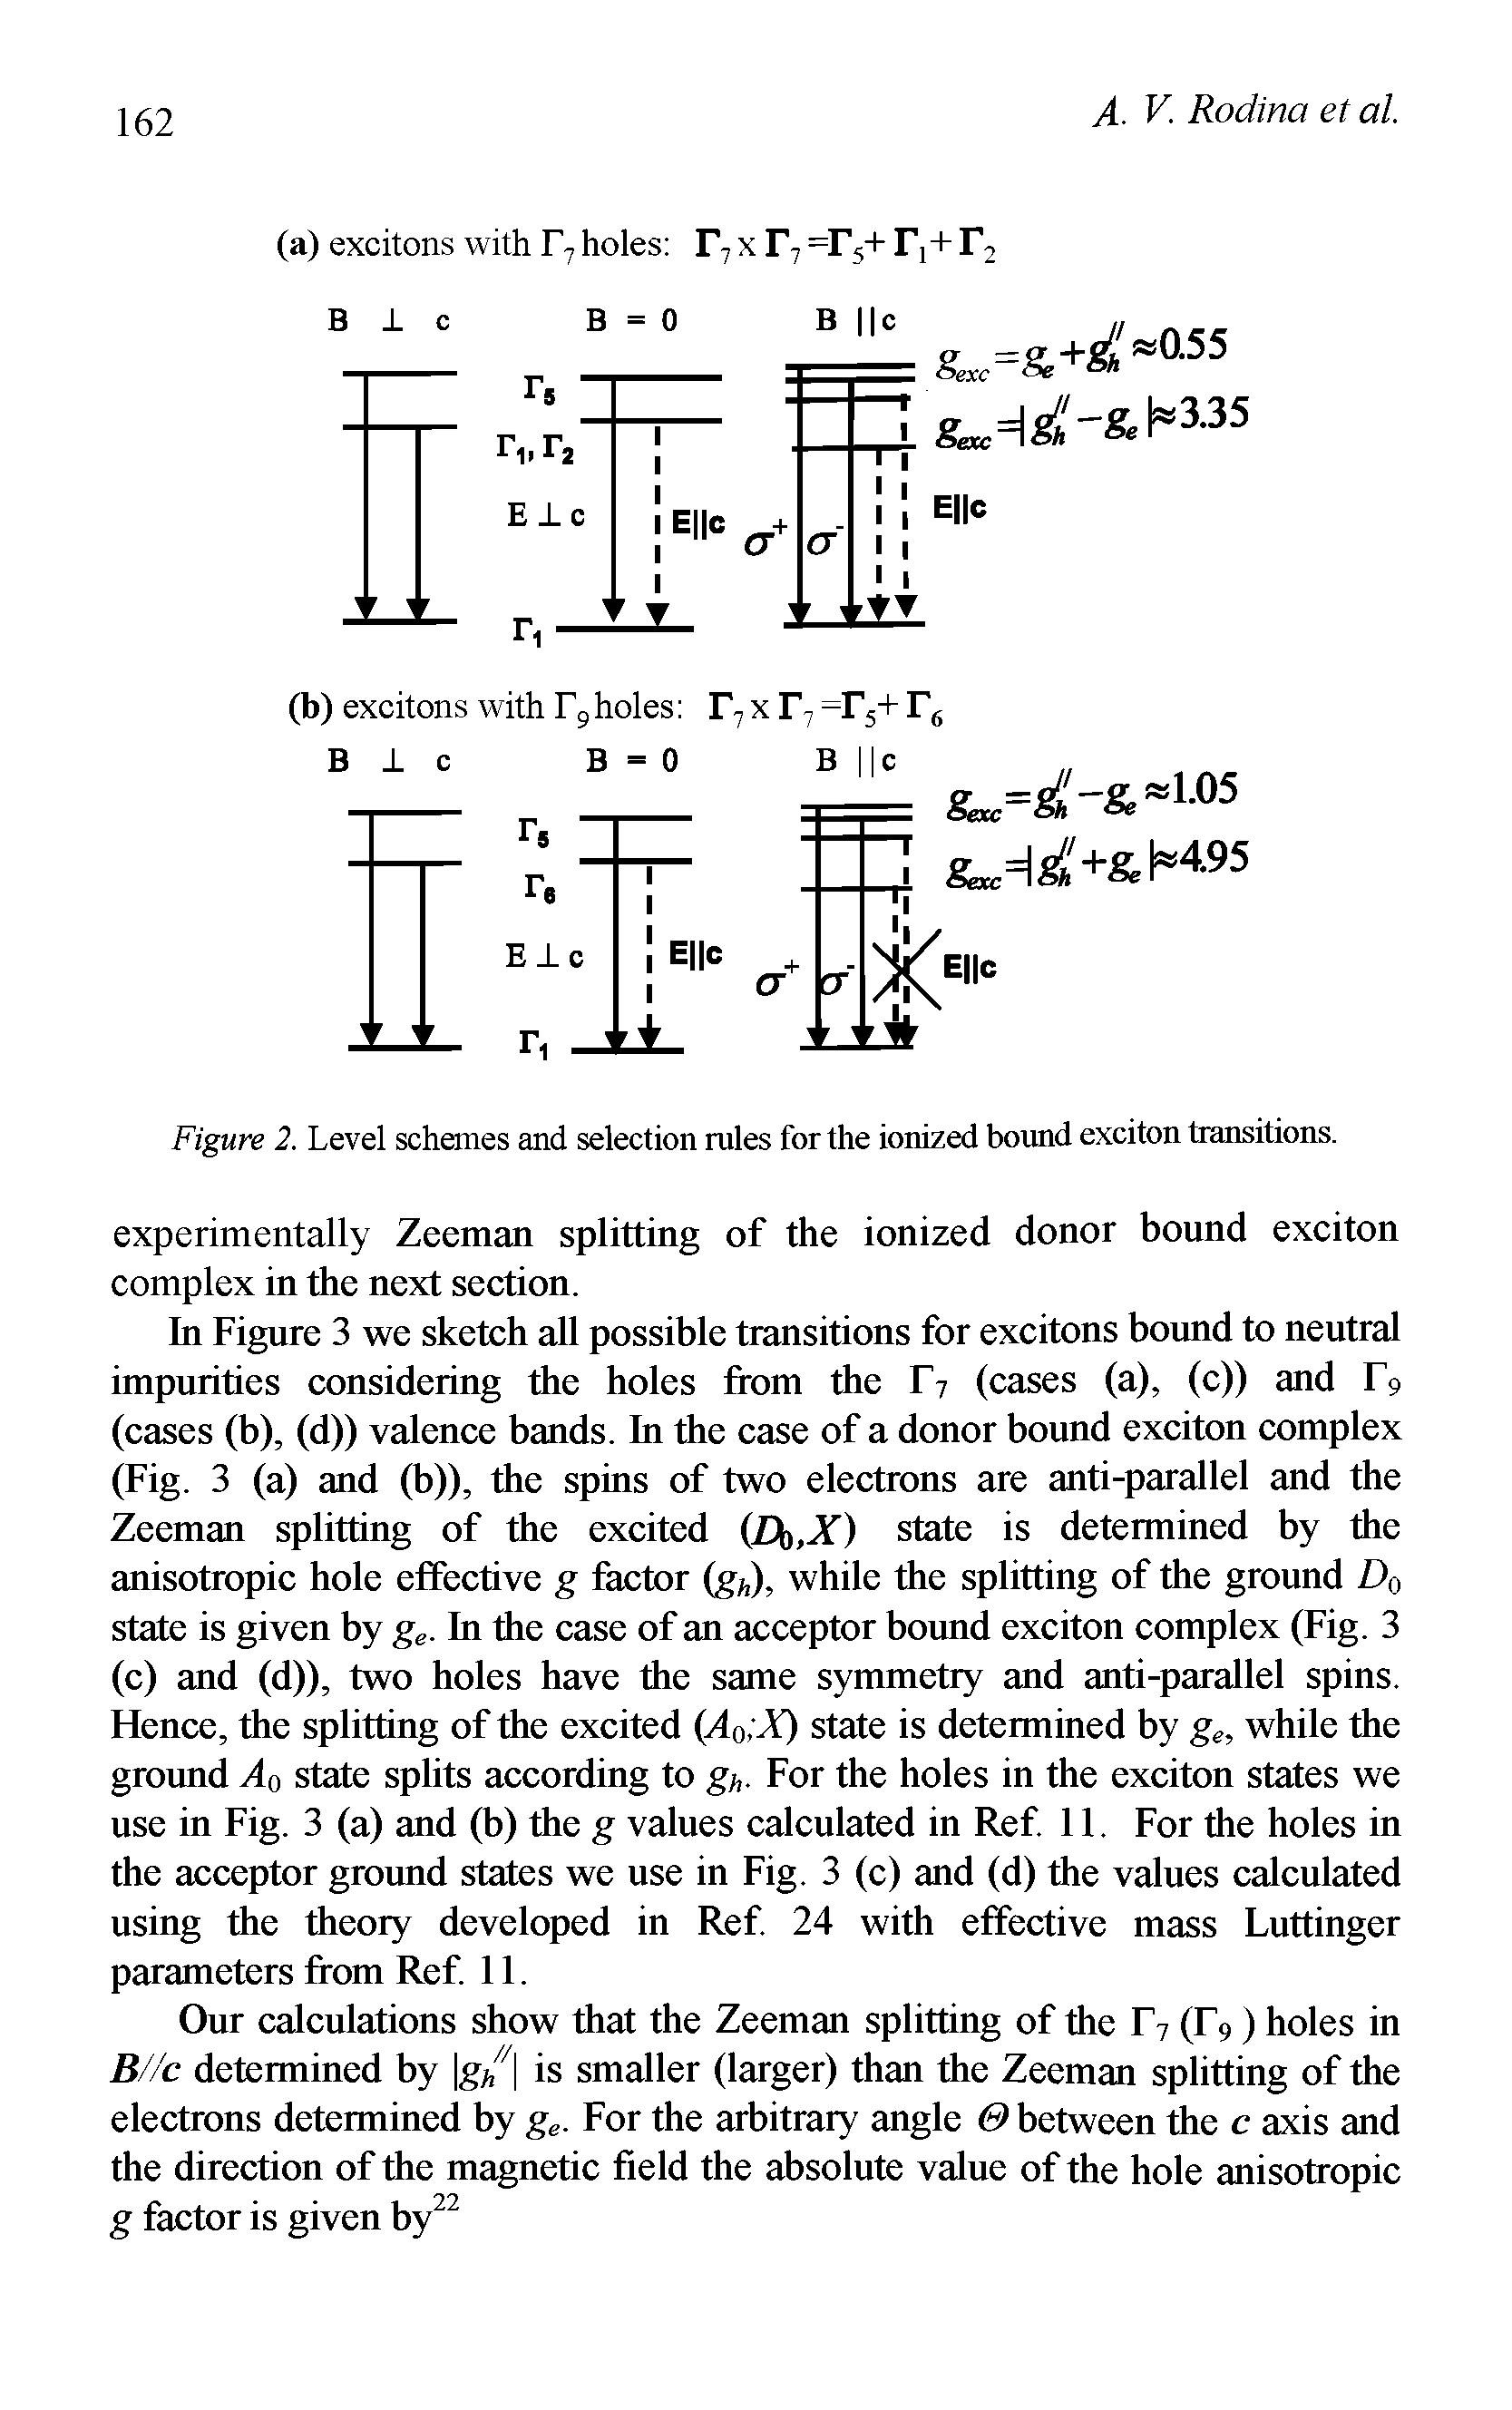 Figure 2. Level schemes and selection rules for the ionized bound exciton transitions.